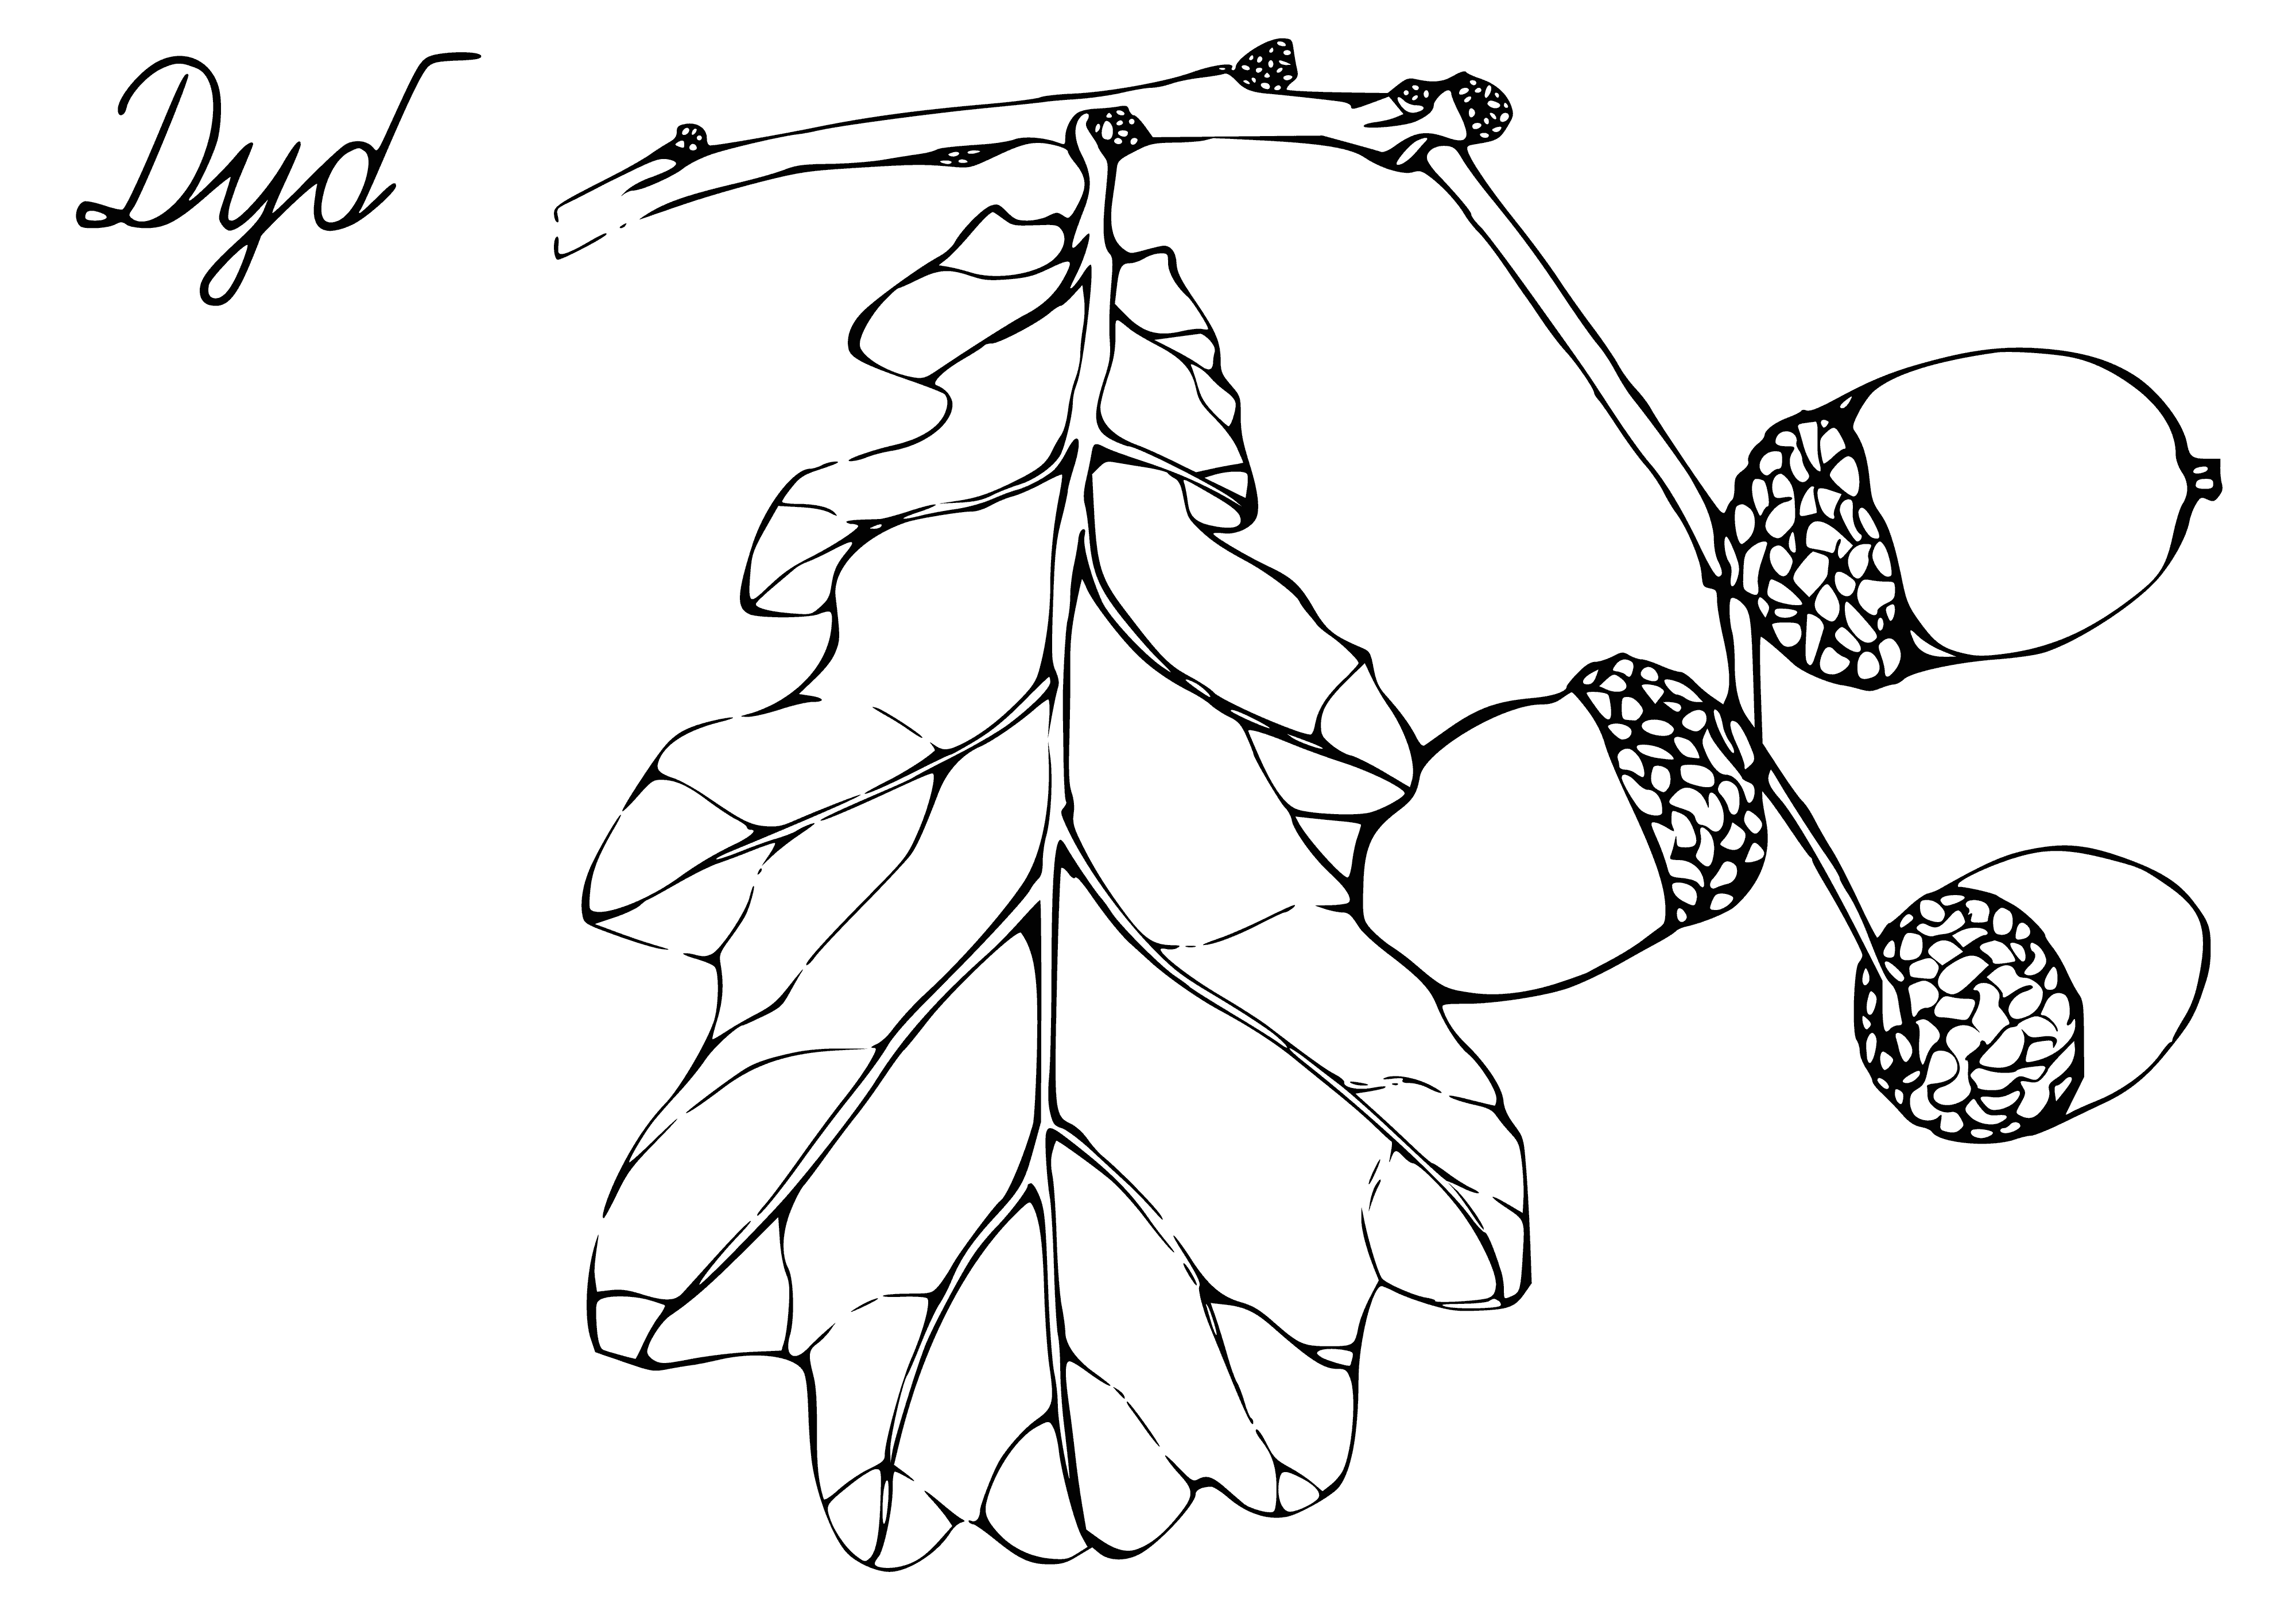 coloring page: Coloring page of oak tree with lobed leaves and green acorns.